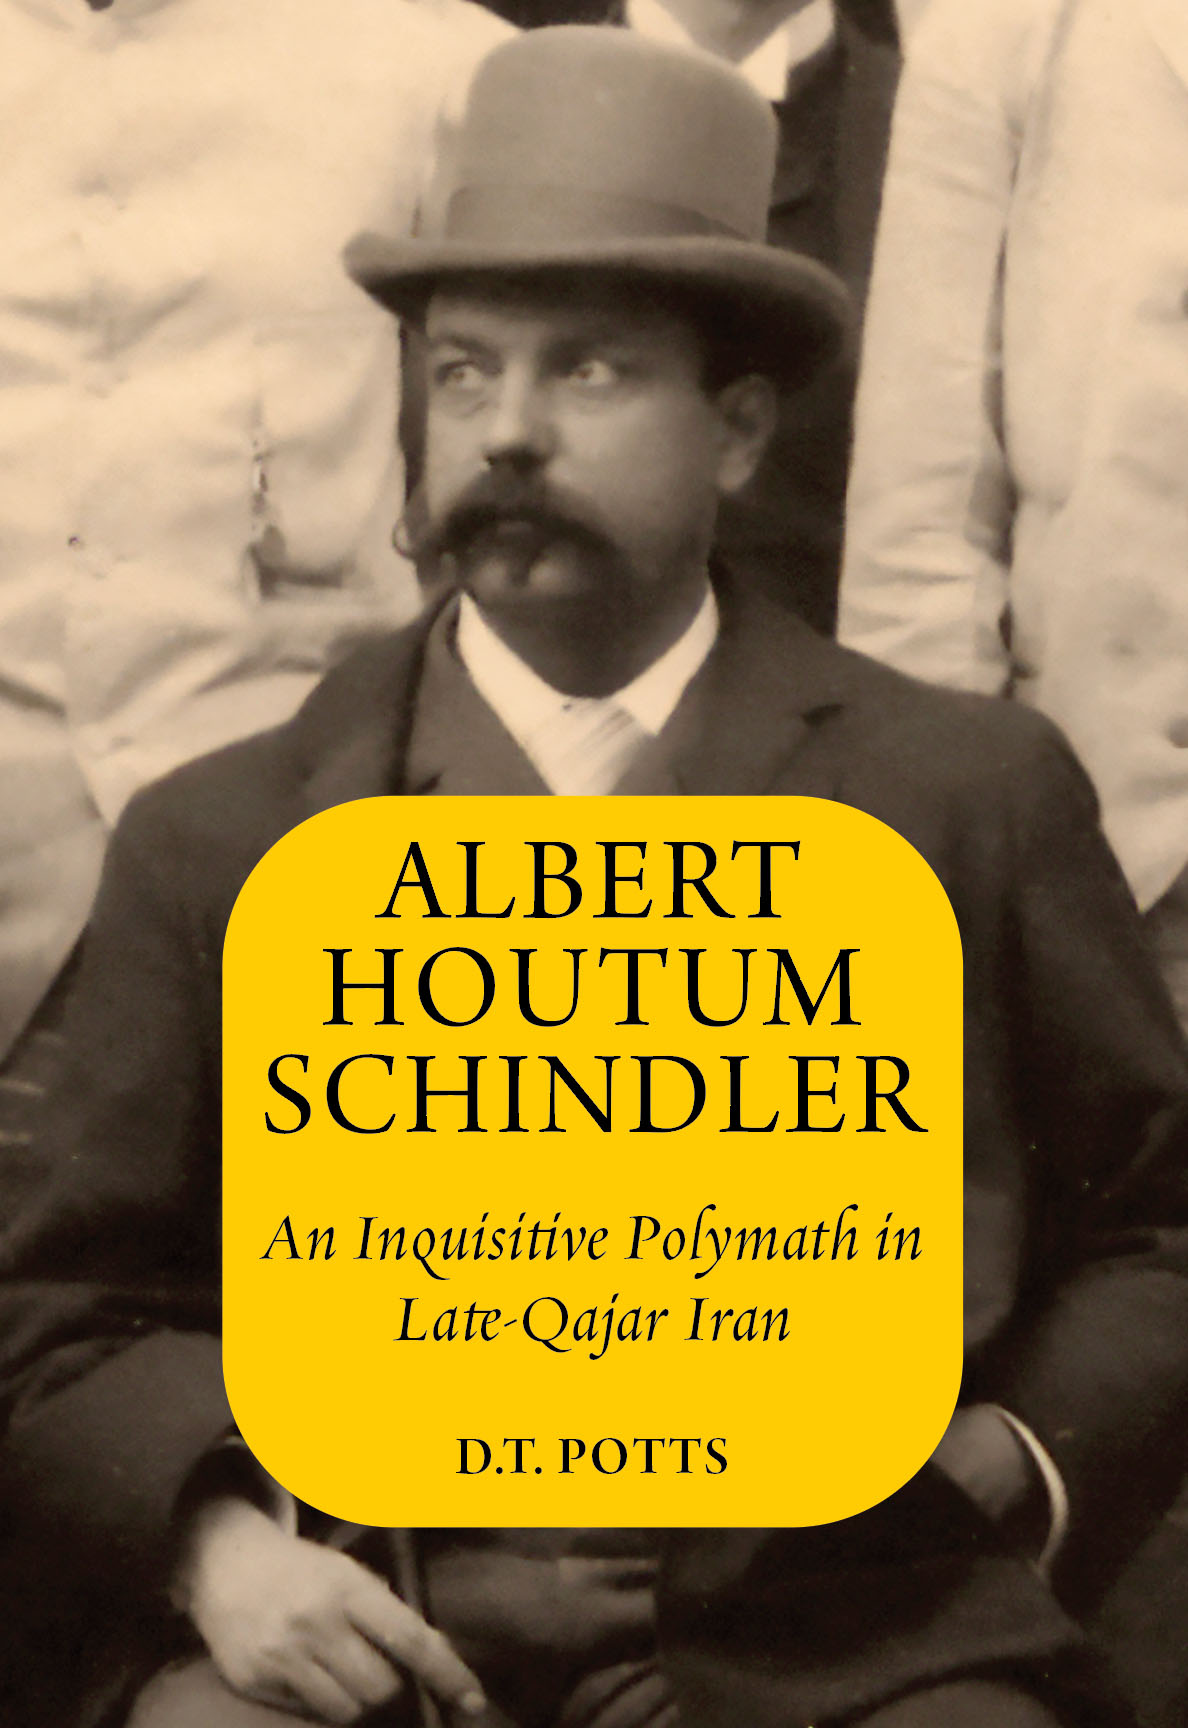 New Publication by ISAW Professor Dan Potts on Albert Houtum Schindler: A Remarkable Polymath in Late-Qajar Iran